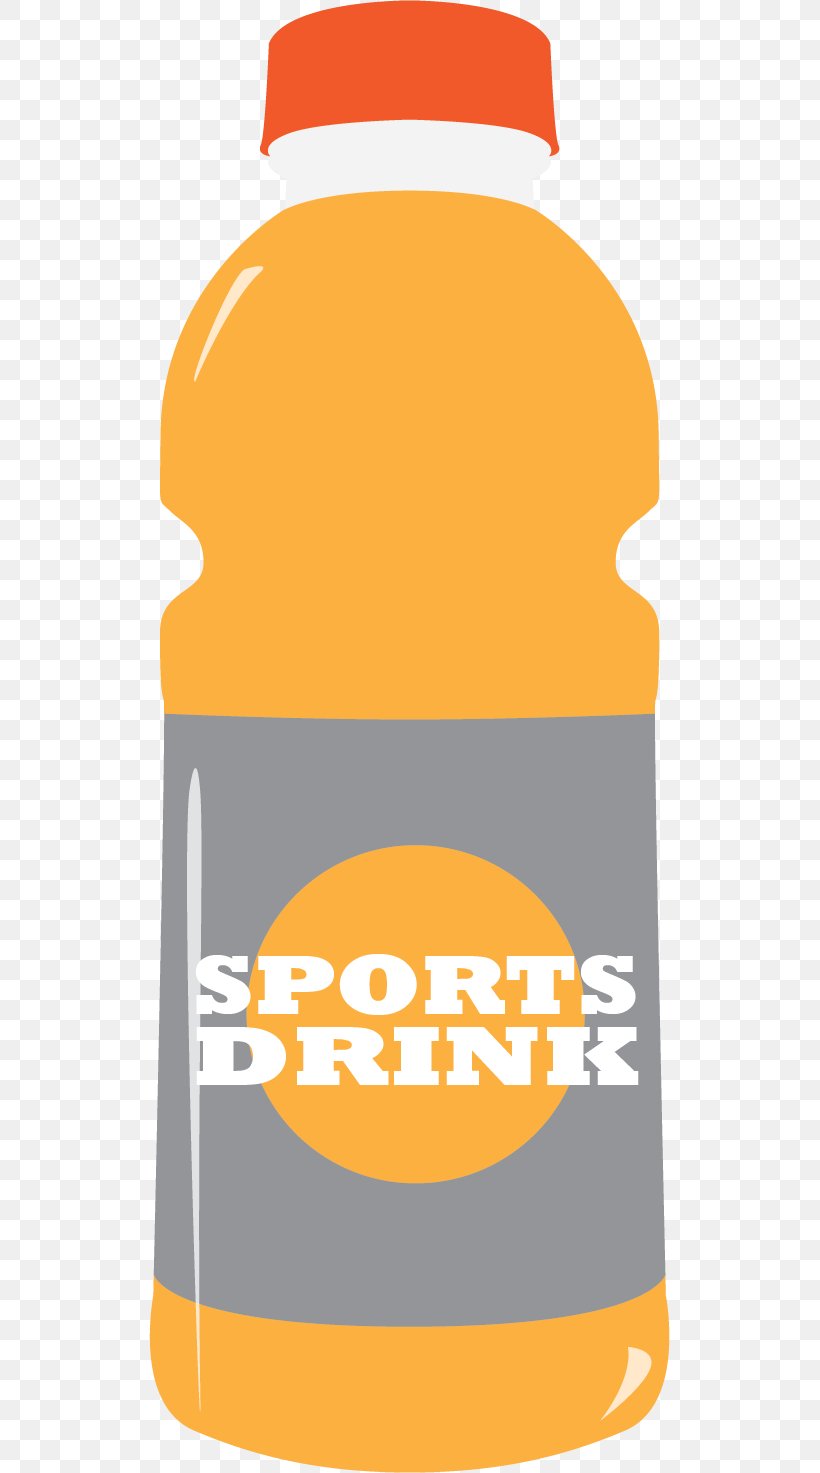 Sports & Energy Drinks Fizzy Drinks Iced Tea Clip Art, PNG, 521x1473px, Sports Energy Drinks, Bottle, Coffee, Drink, Energy Drink Download Free